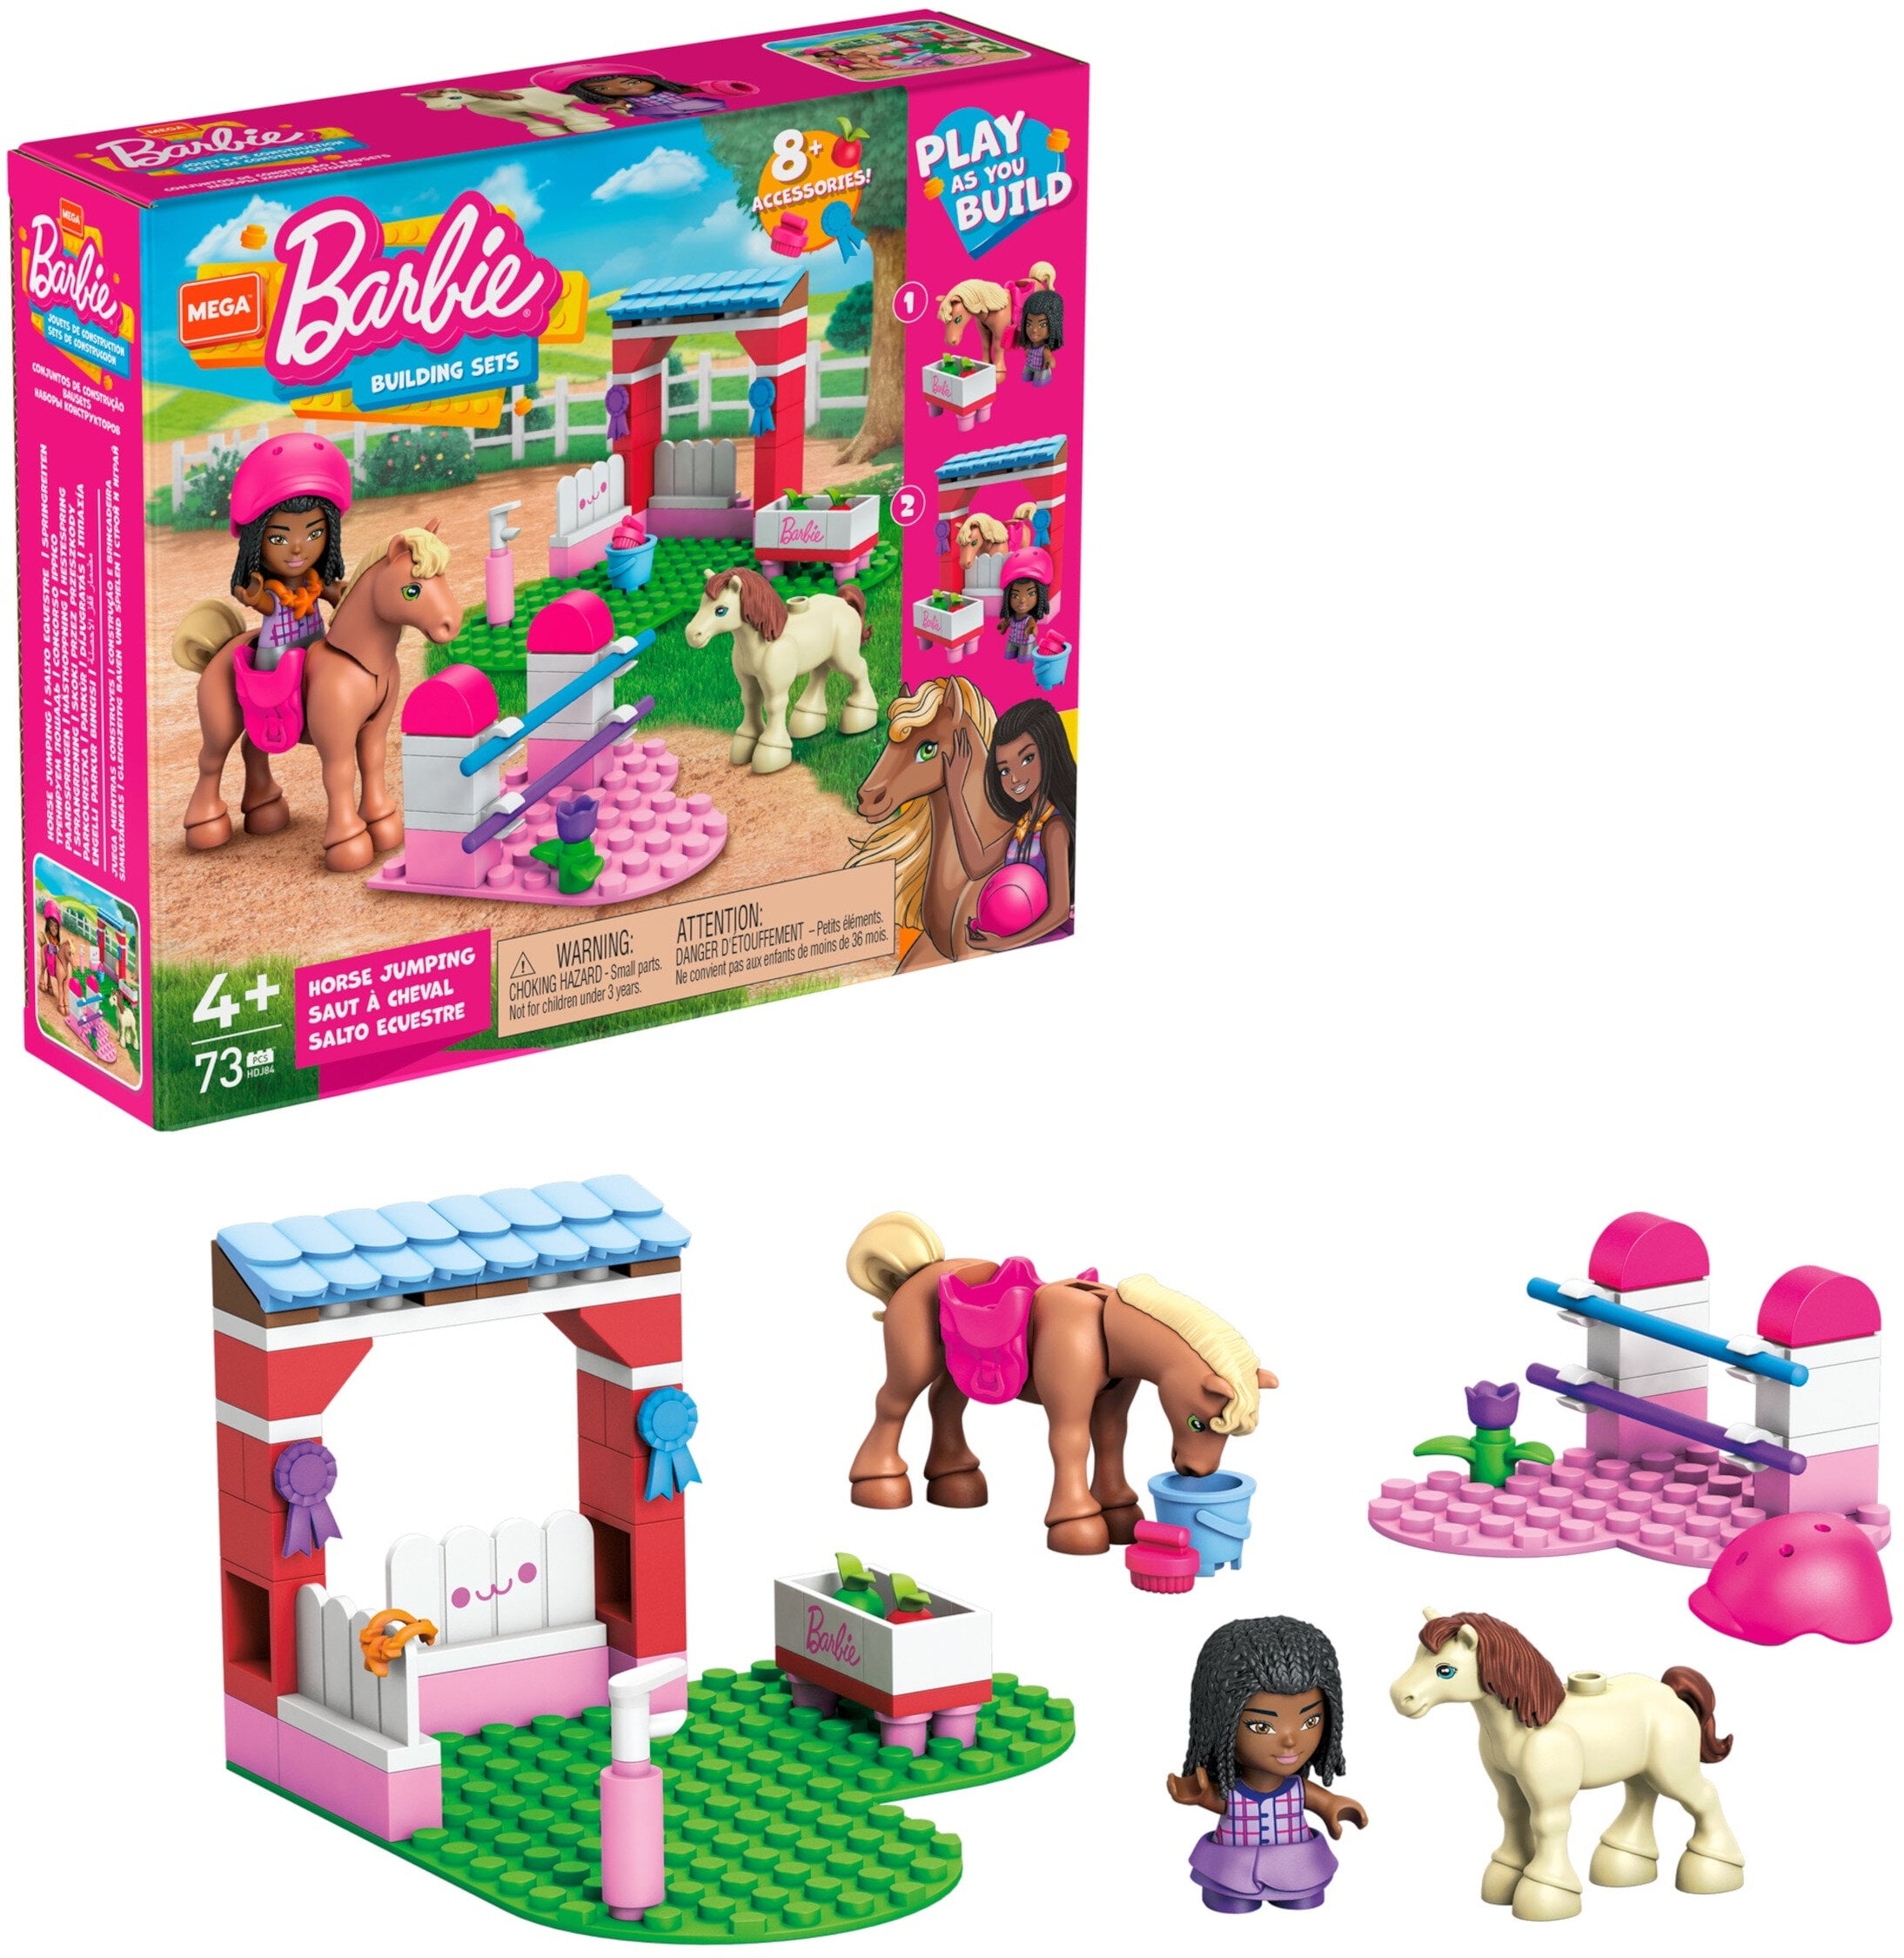 Barbie's building a challenge to lego